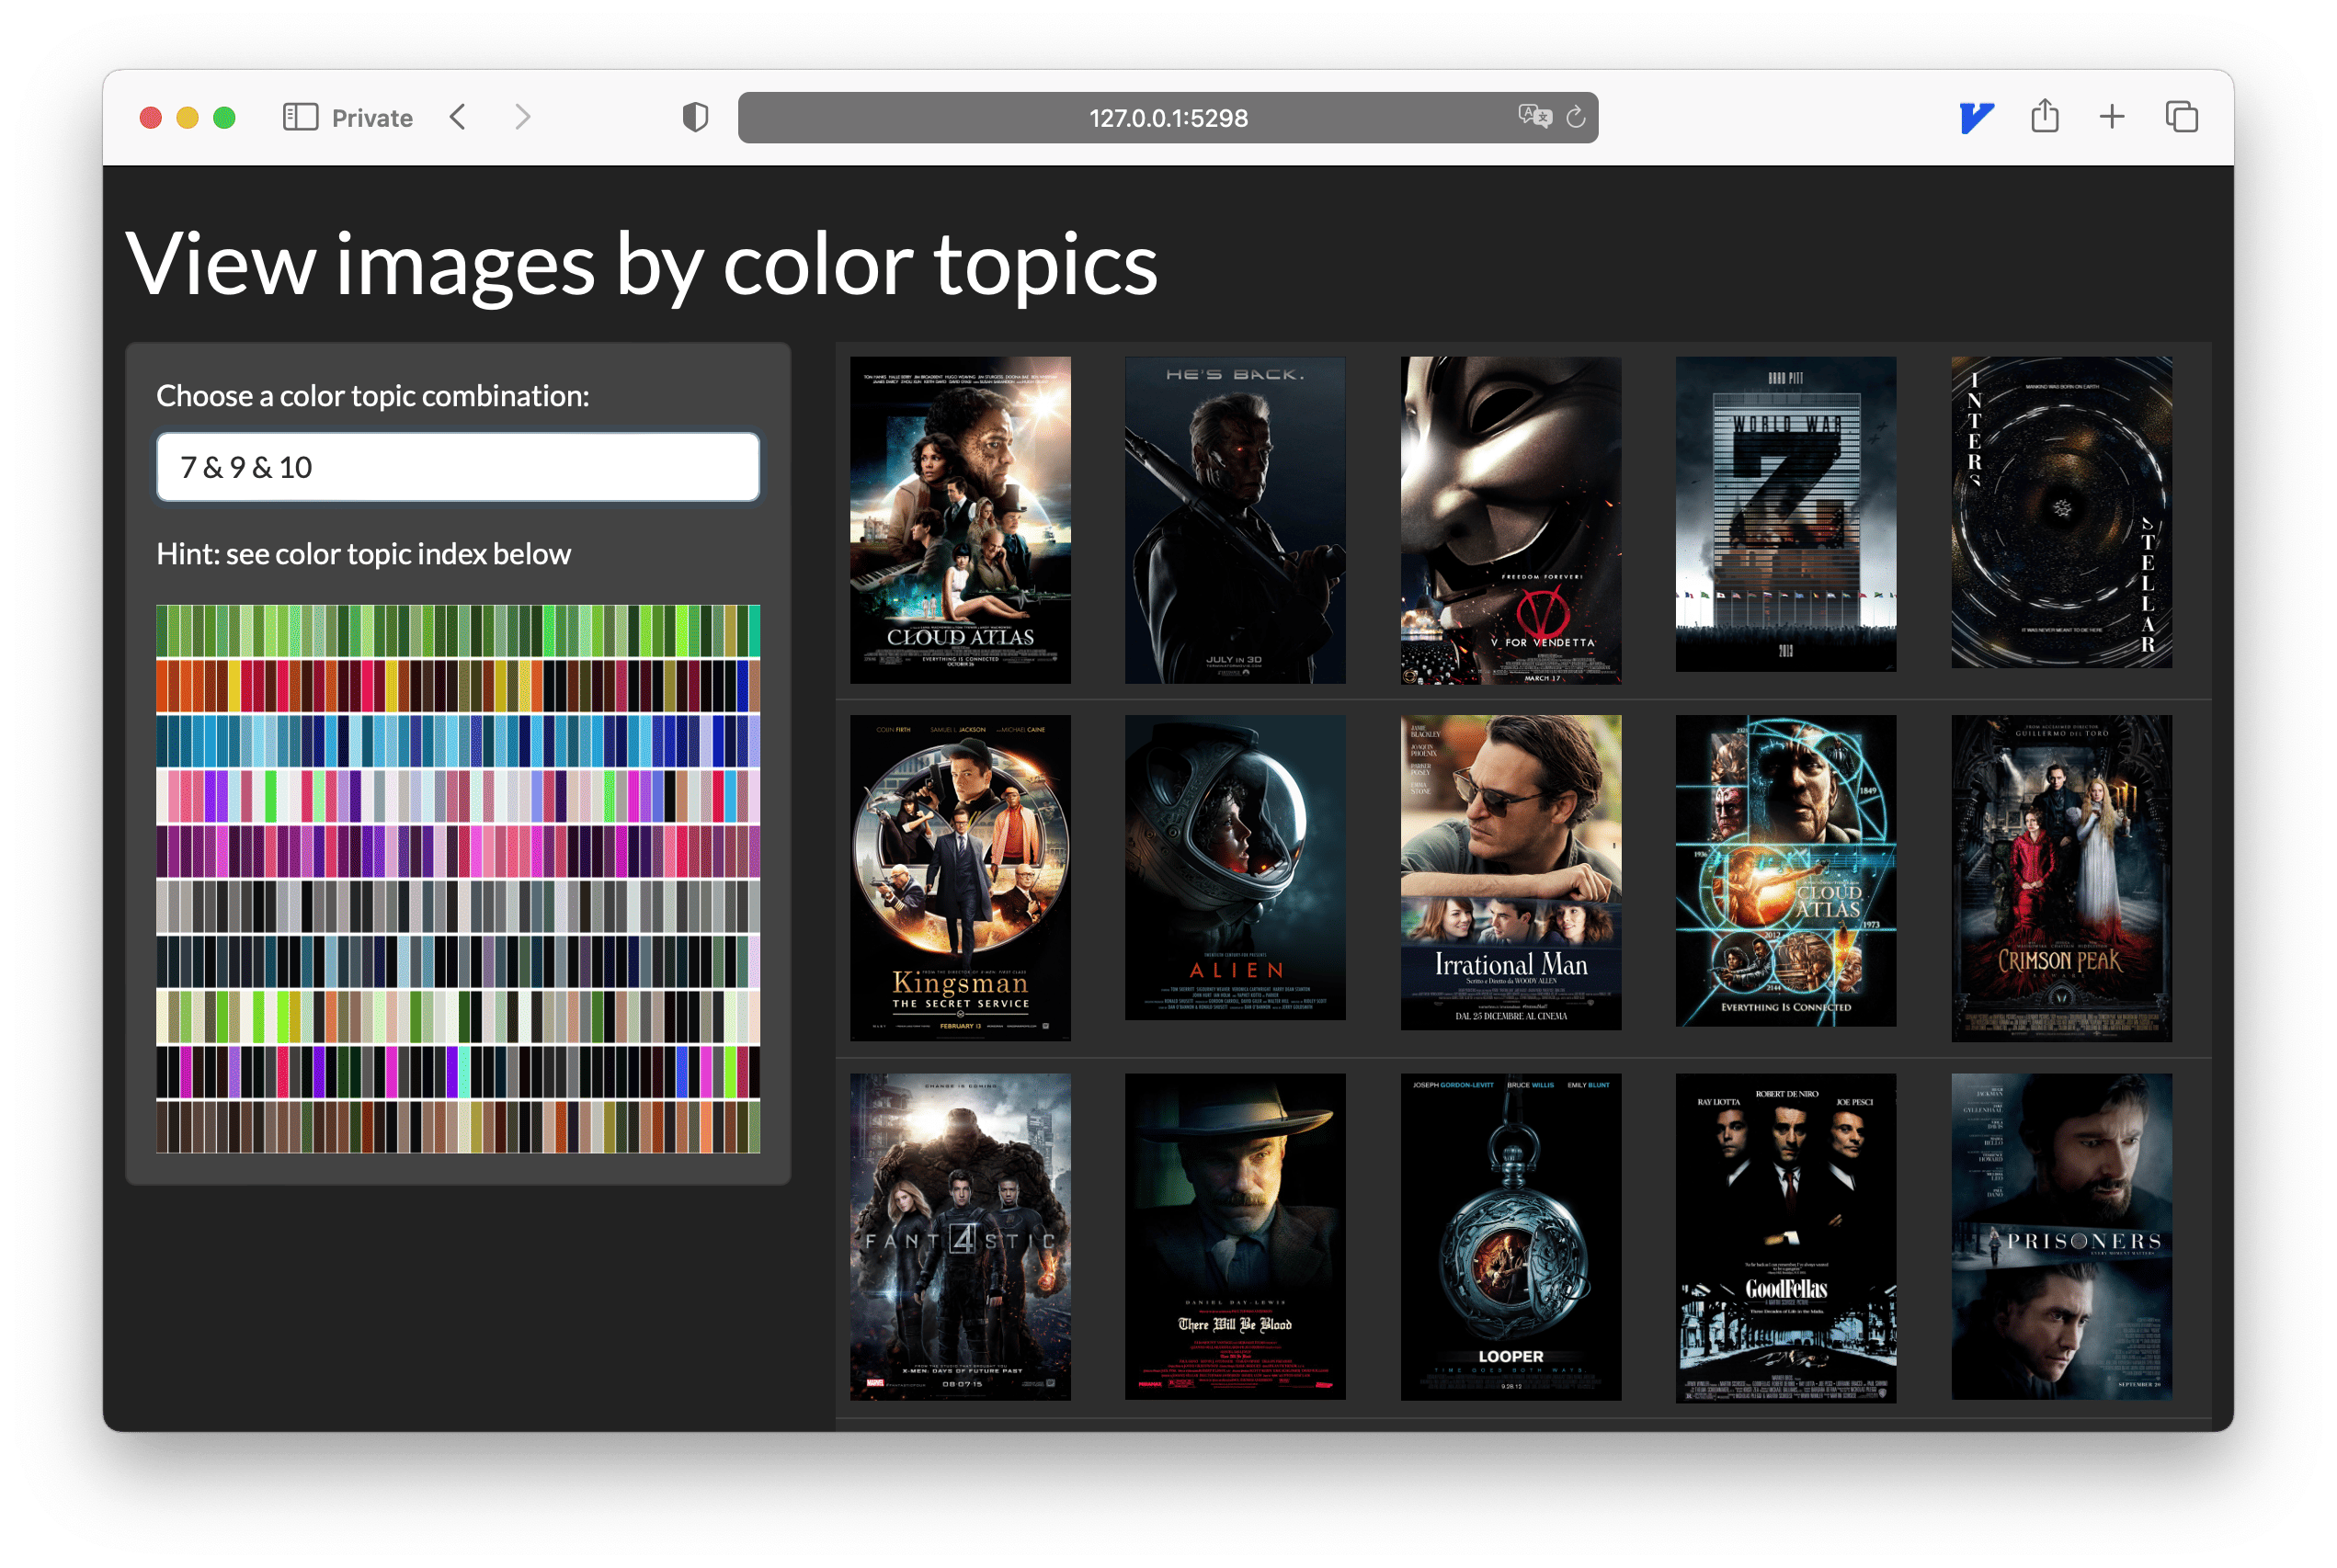 Shiny app for viewing images by color topics.